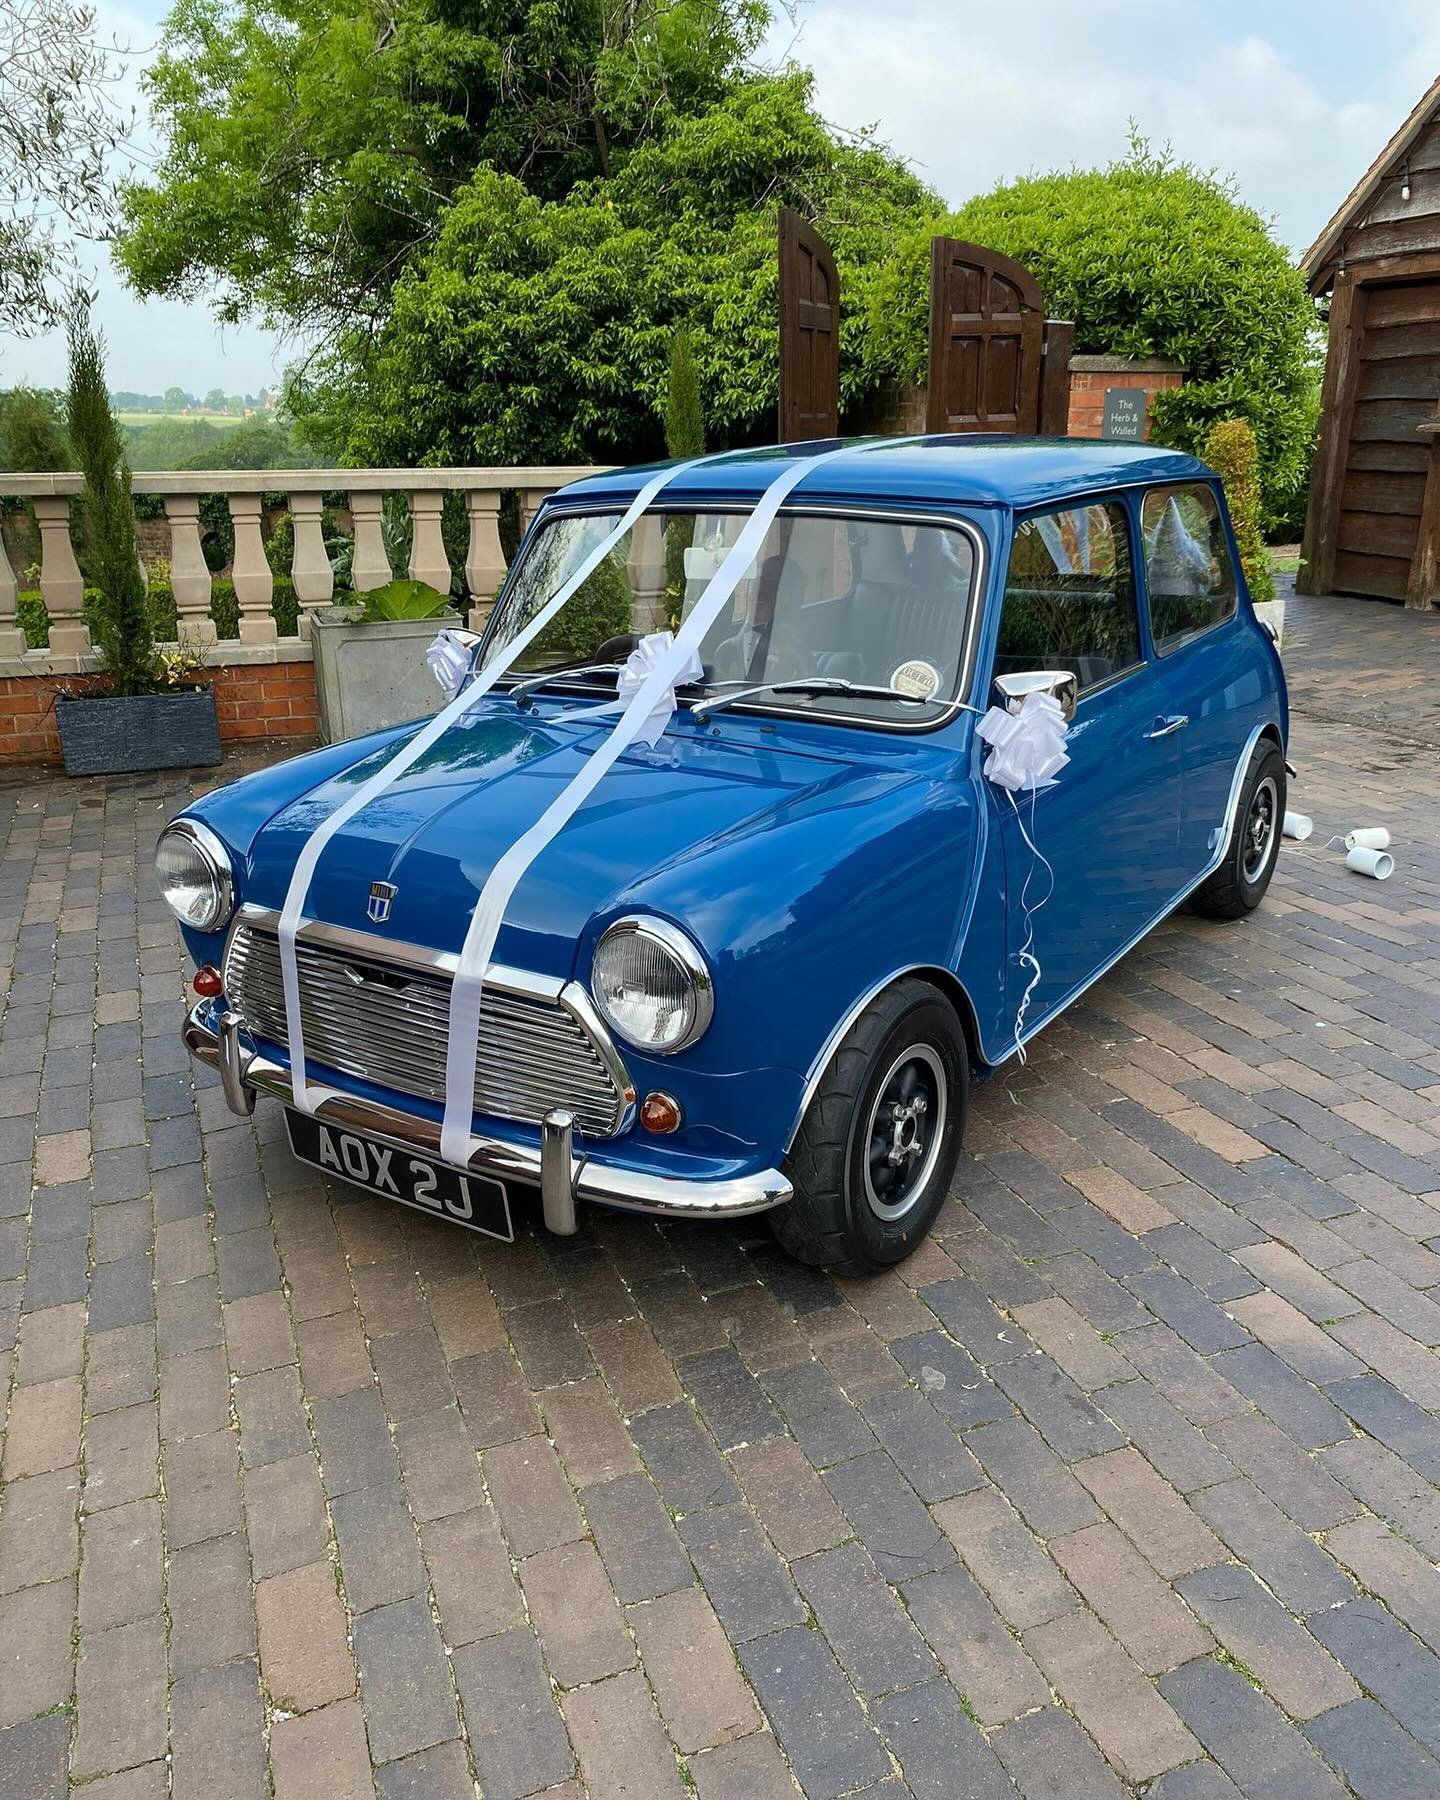 &lsquo;Rufus&rsquo; got married!

When a customer shares pictures of his wedding car 😊

#customercar #weddingcar #restorationclient #rufus #classicminis #minisuk #ukminis #realminis